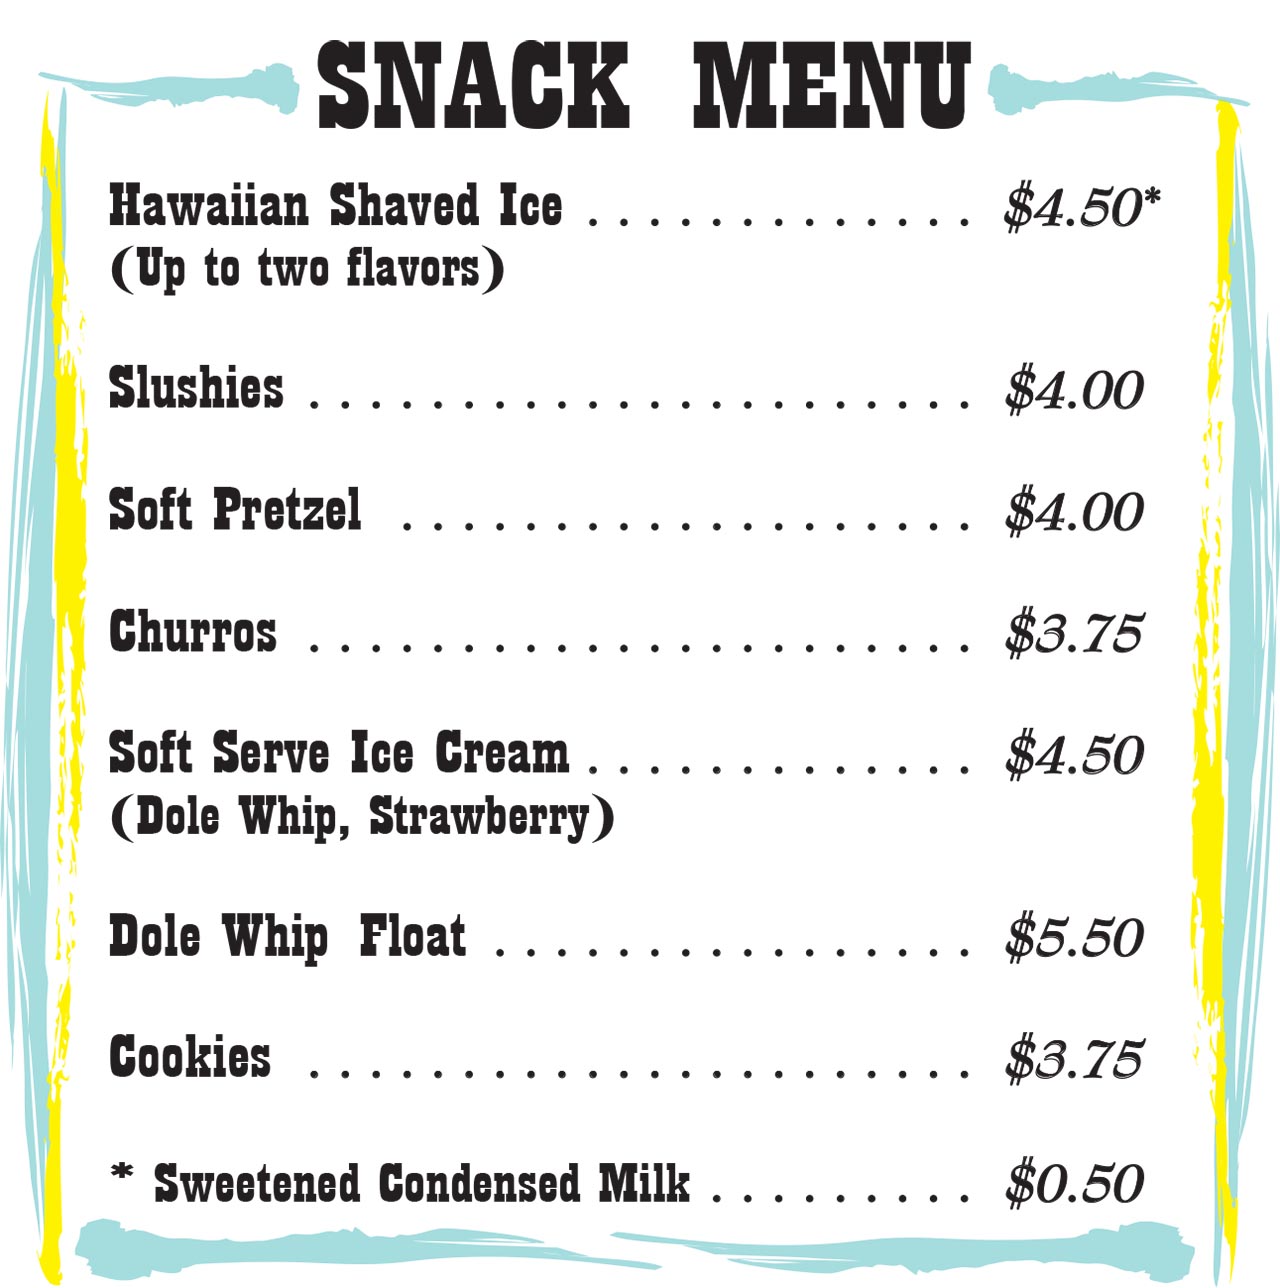 Image showing snack menu with prices ranging from $3.75 to $5.50